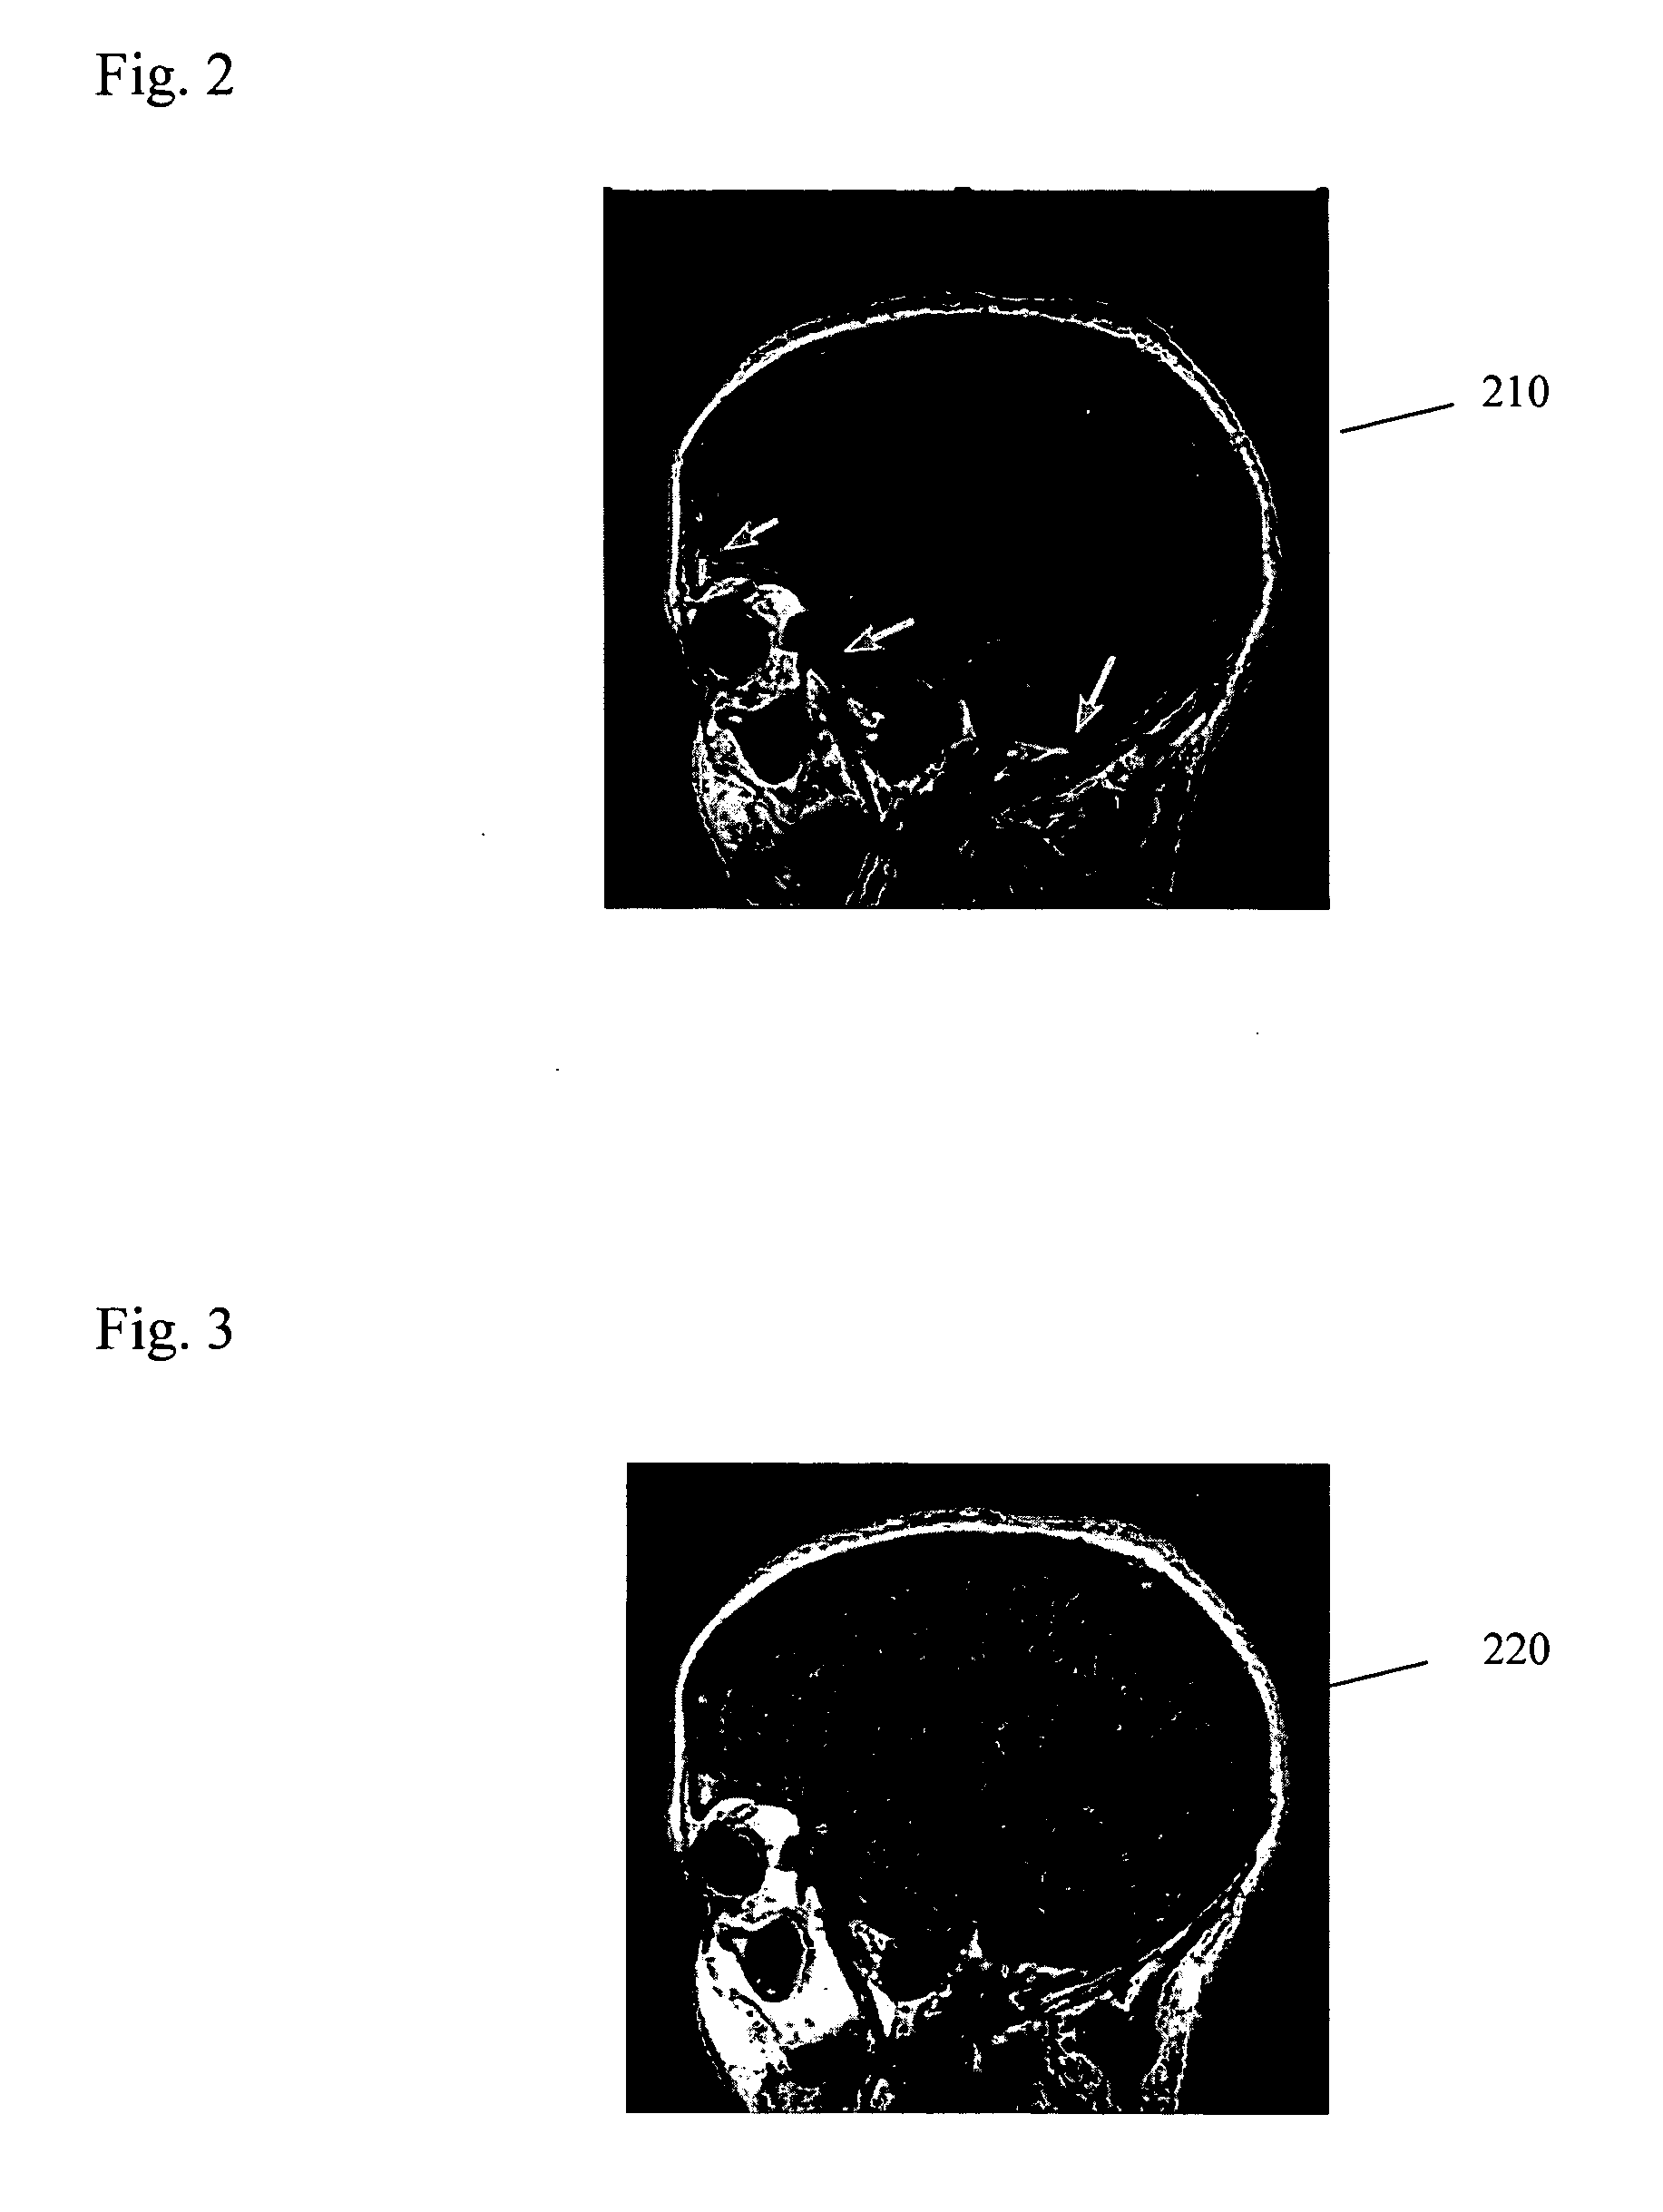 System, software arrangement and method for segmenting an image